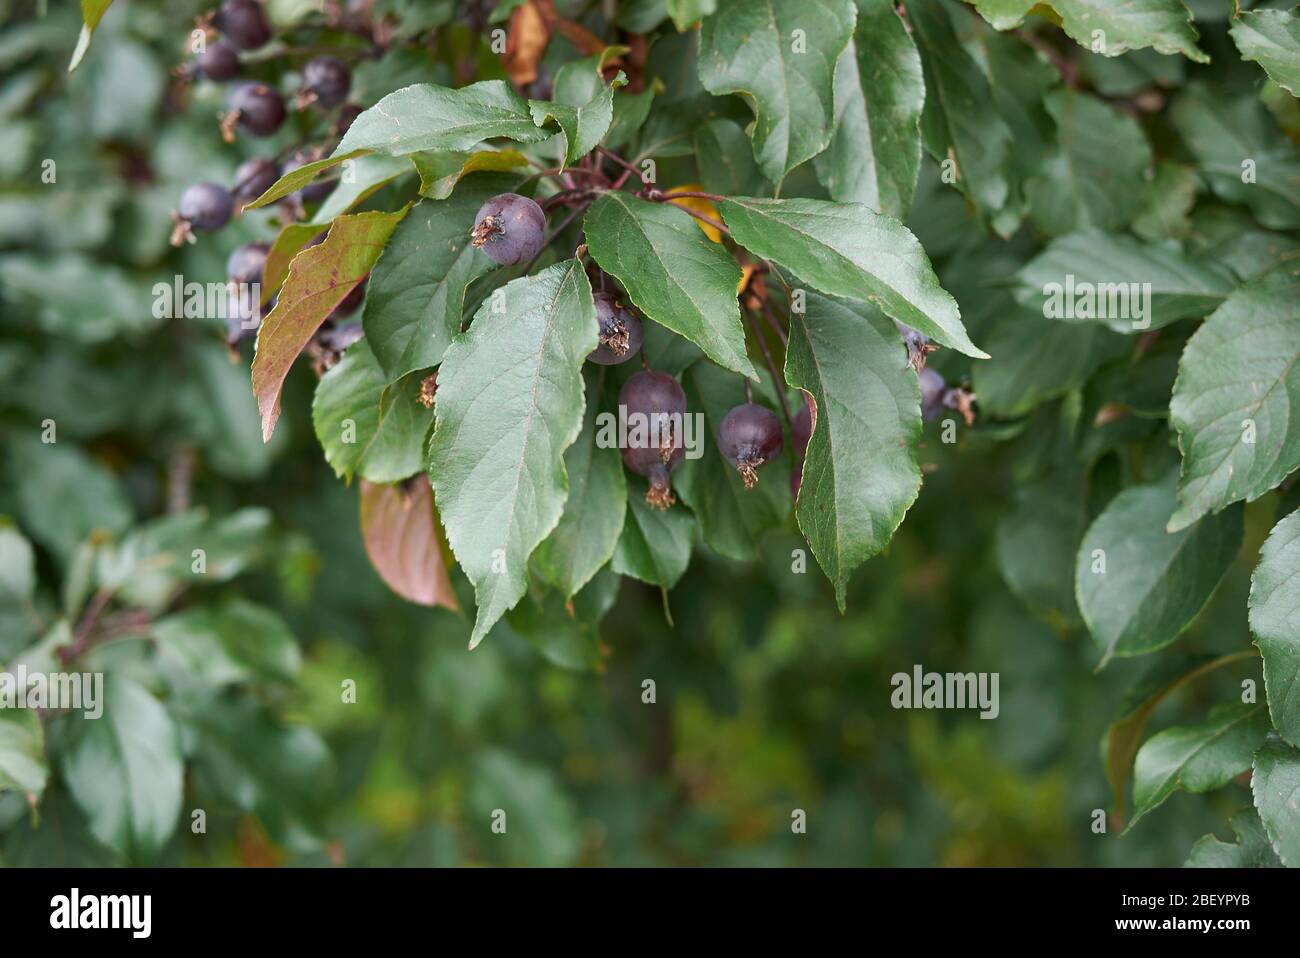 Malus prunifolia branch with purple crab apples Stock Photo